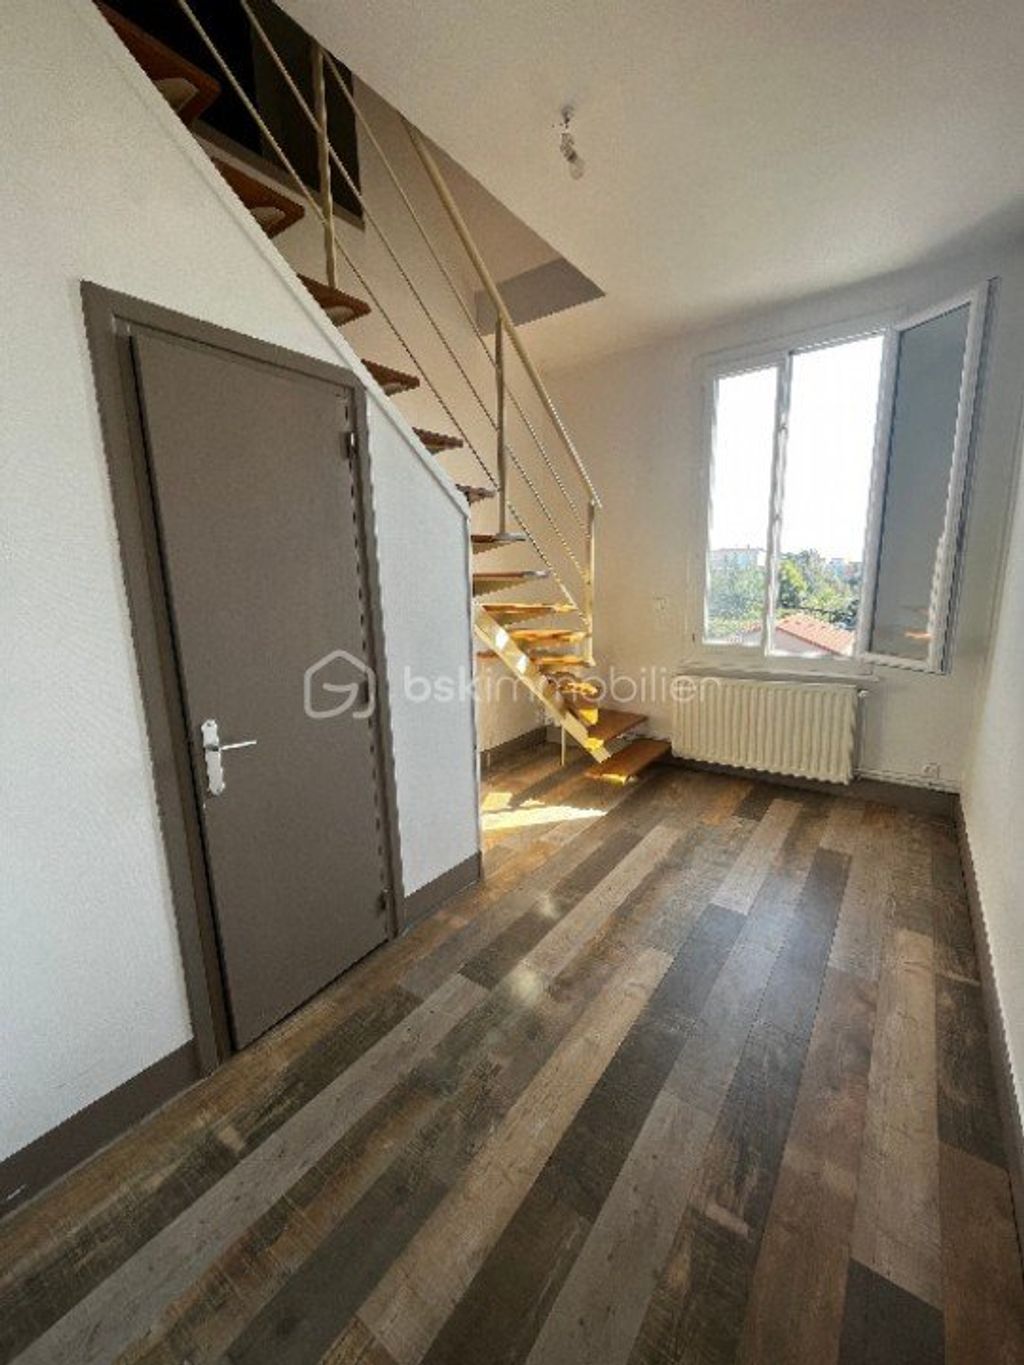 Achat appartement 4 pièce(s) Mably